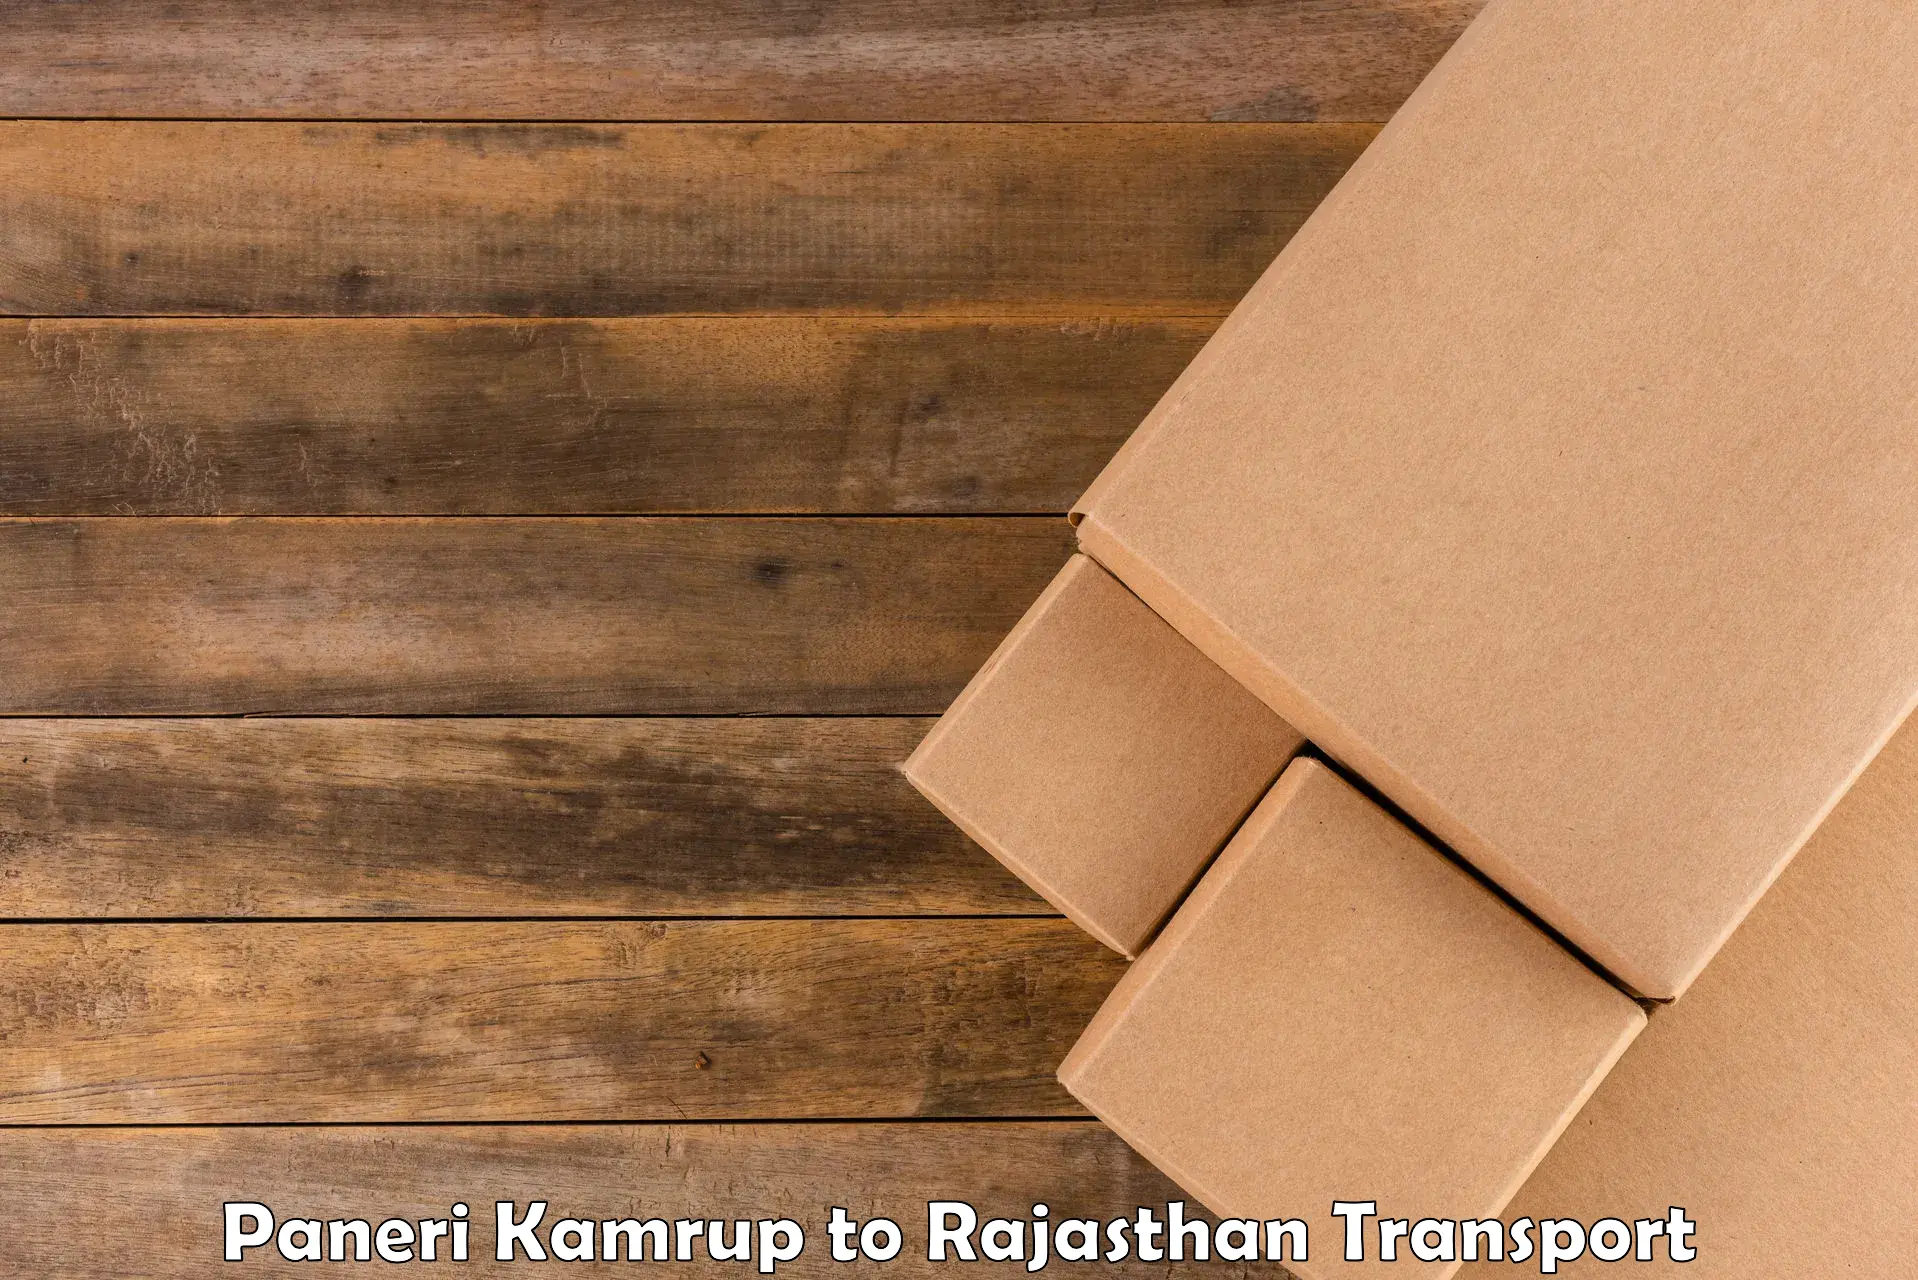 Air freight transport services in Paneri Kamrup to Kherli